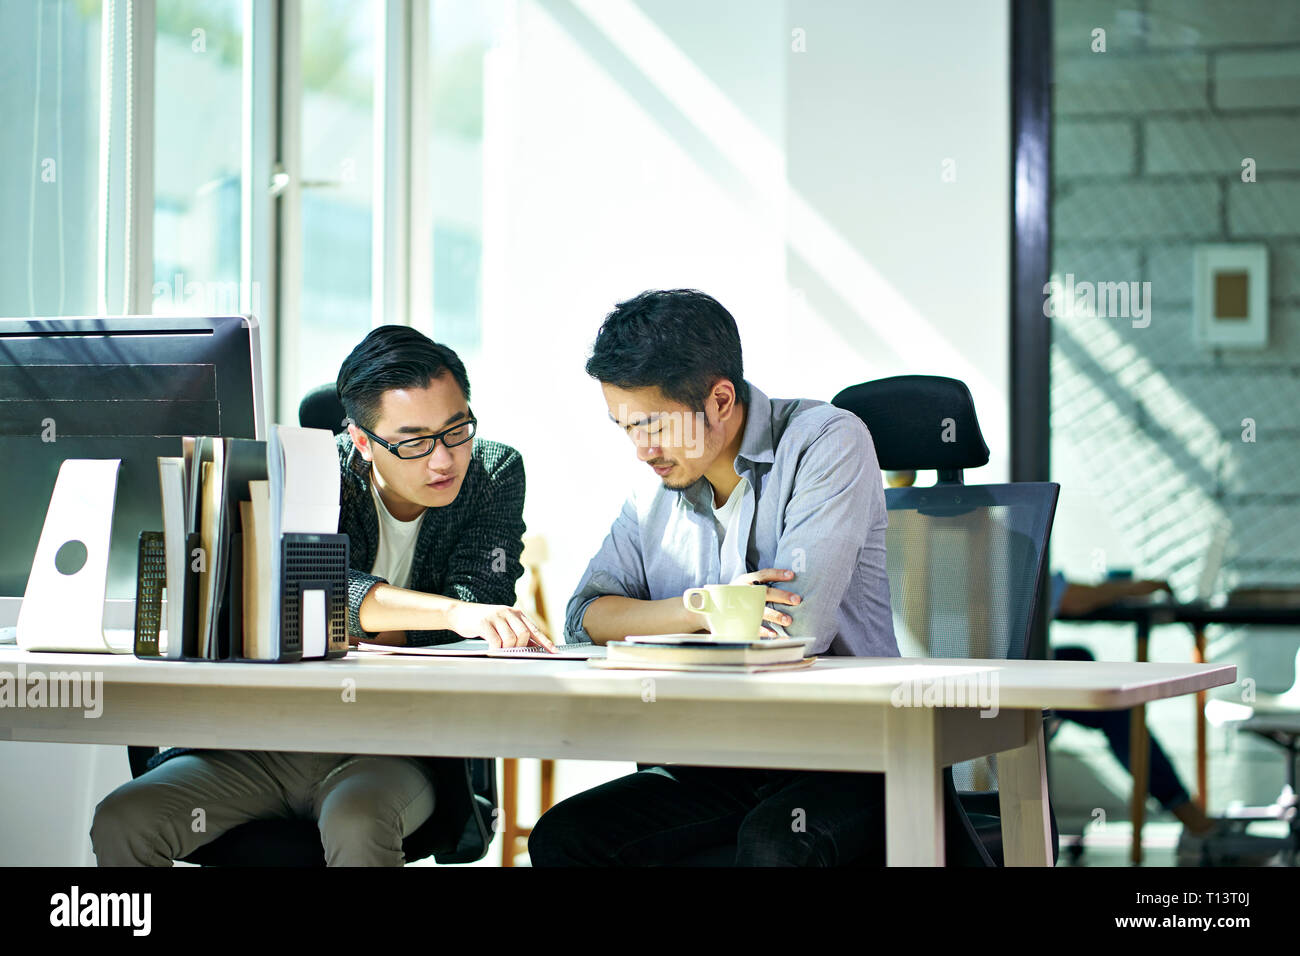 two young asian corporate executives working together discussing business plan in office. Stock Photo